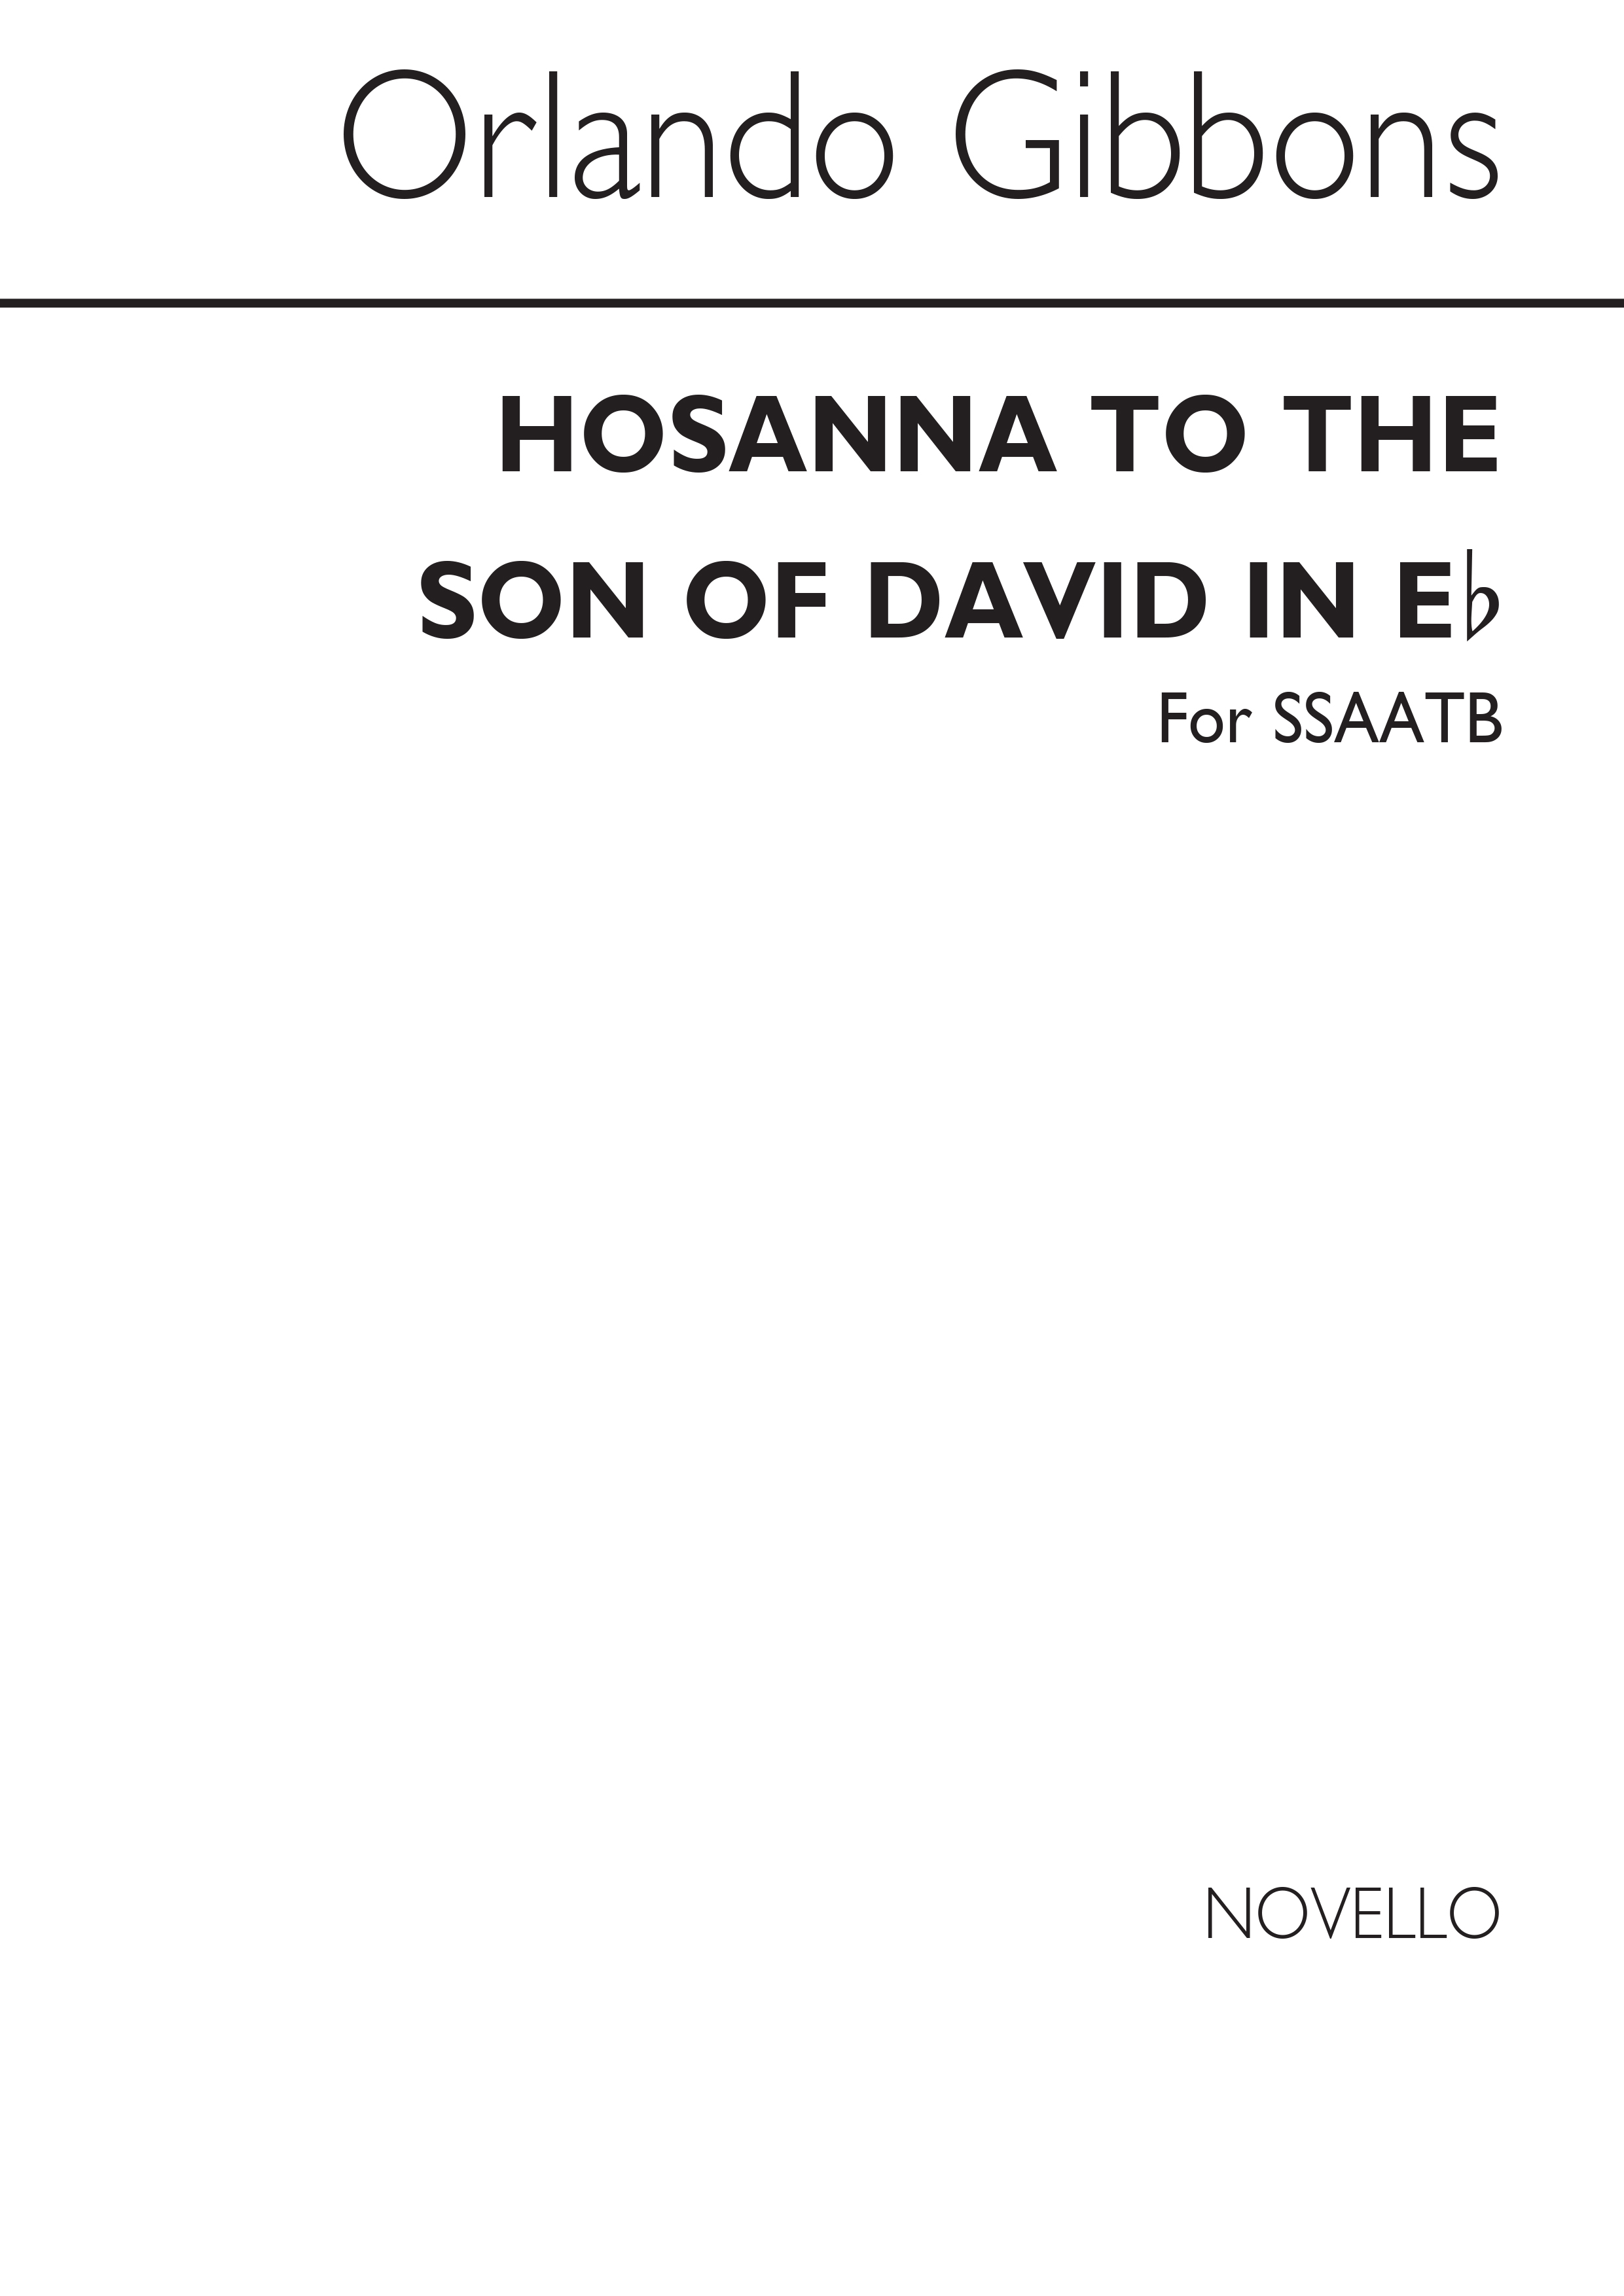 Gibbons Hosanna To The Son Of David Ssaatb (In E Flat)